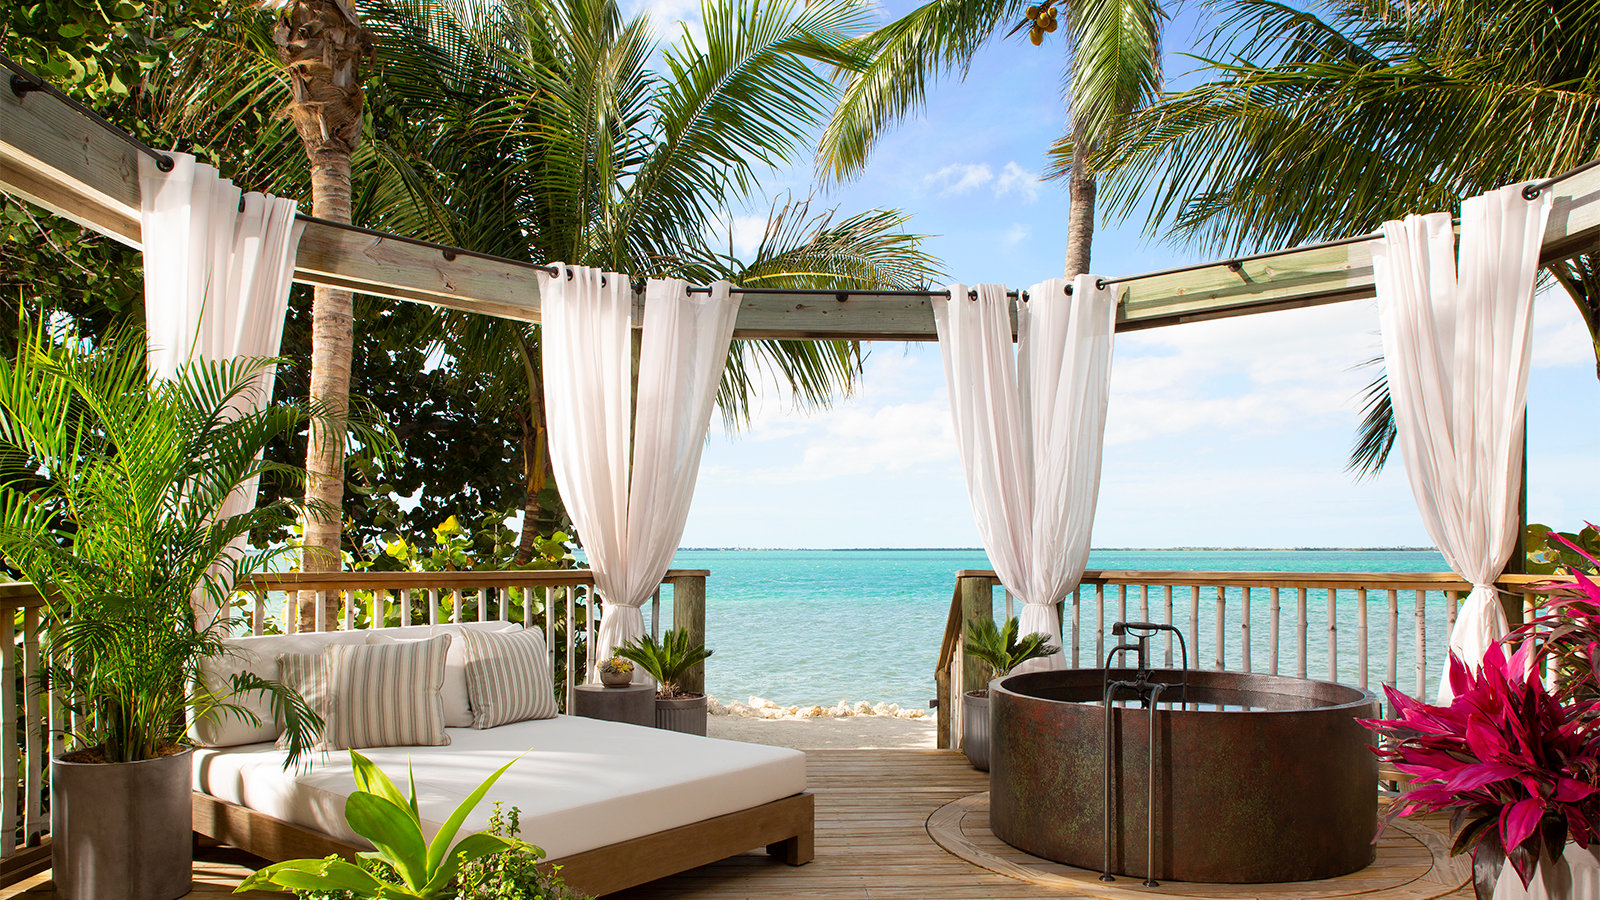 The Island Romance Suite at the Little Palm Island Resort  Spa 